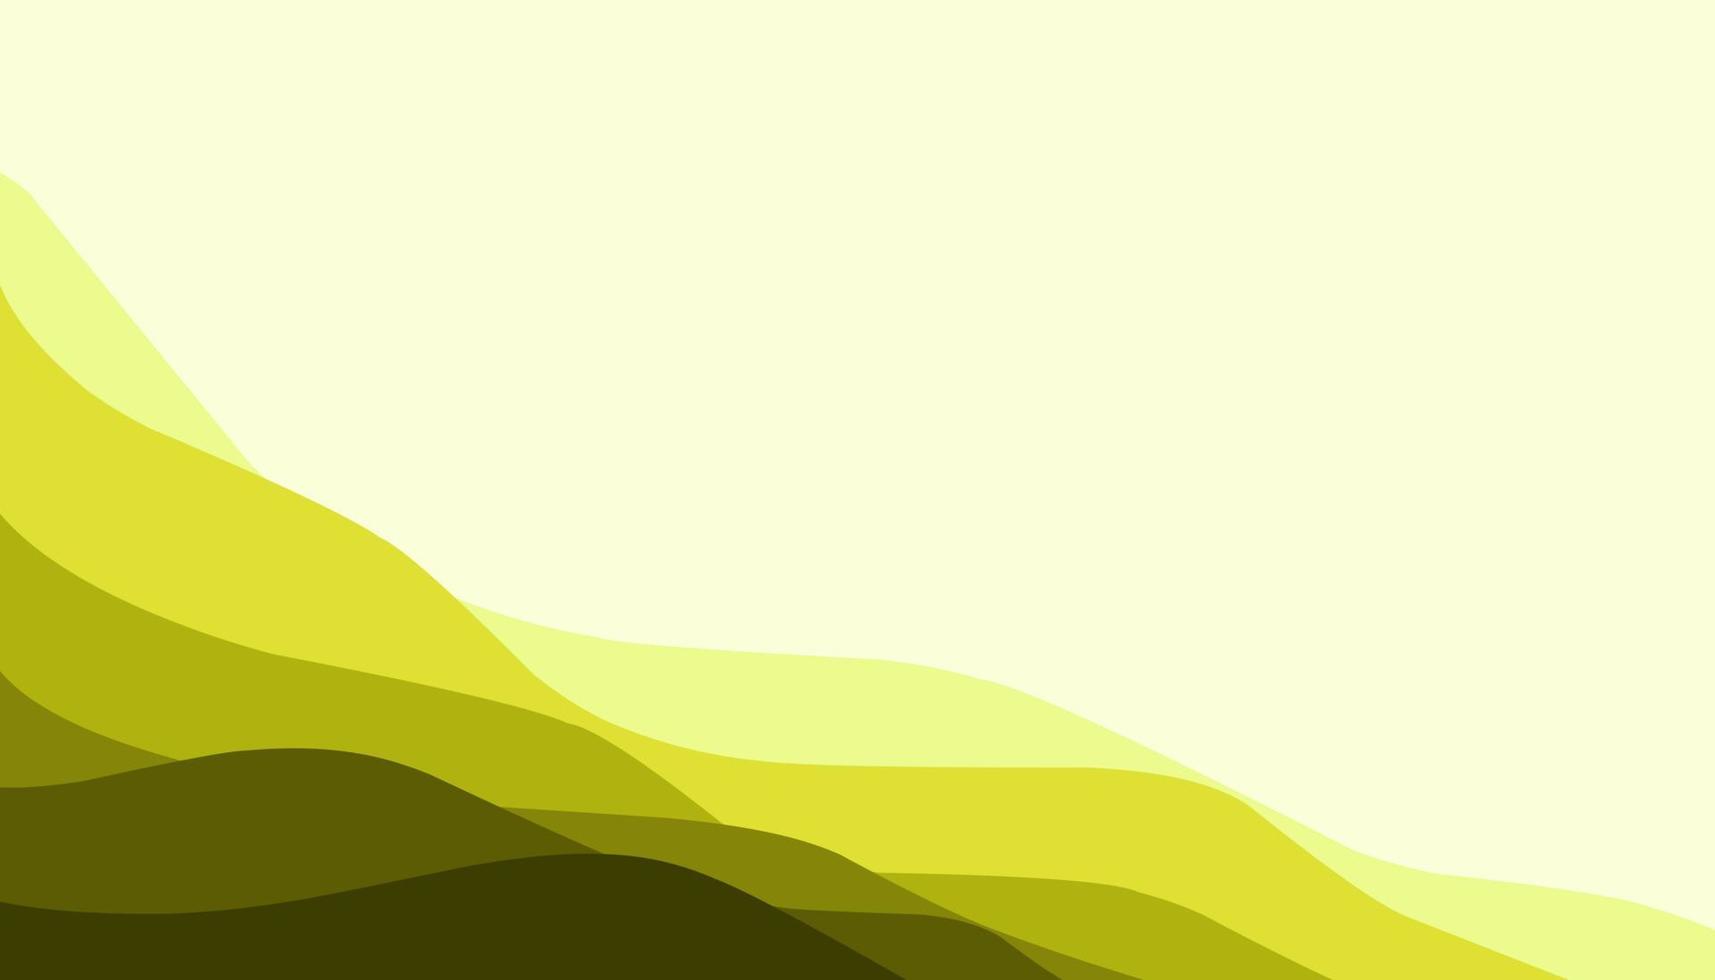 Abstract background illustration of yellow waves vector